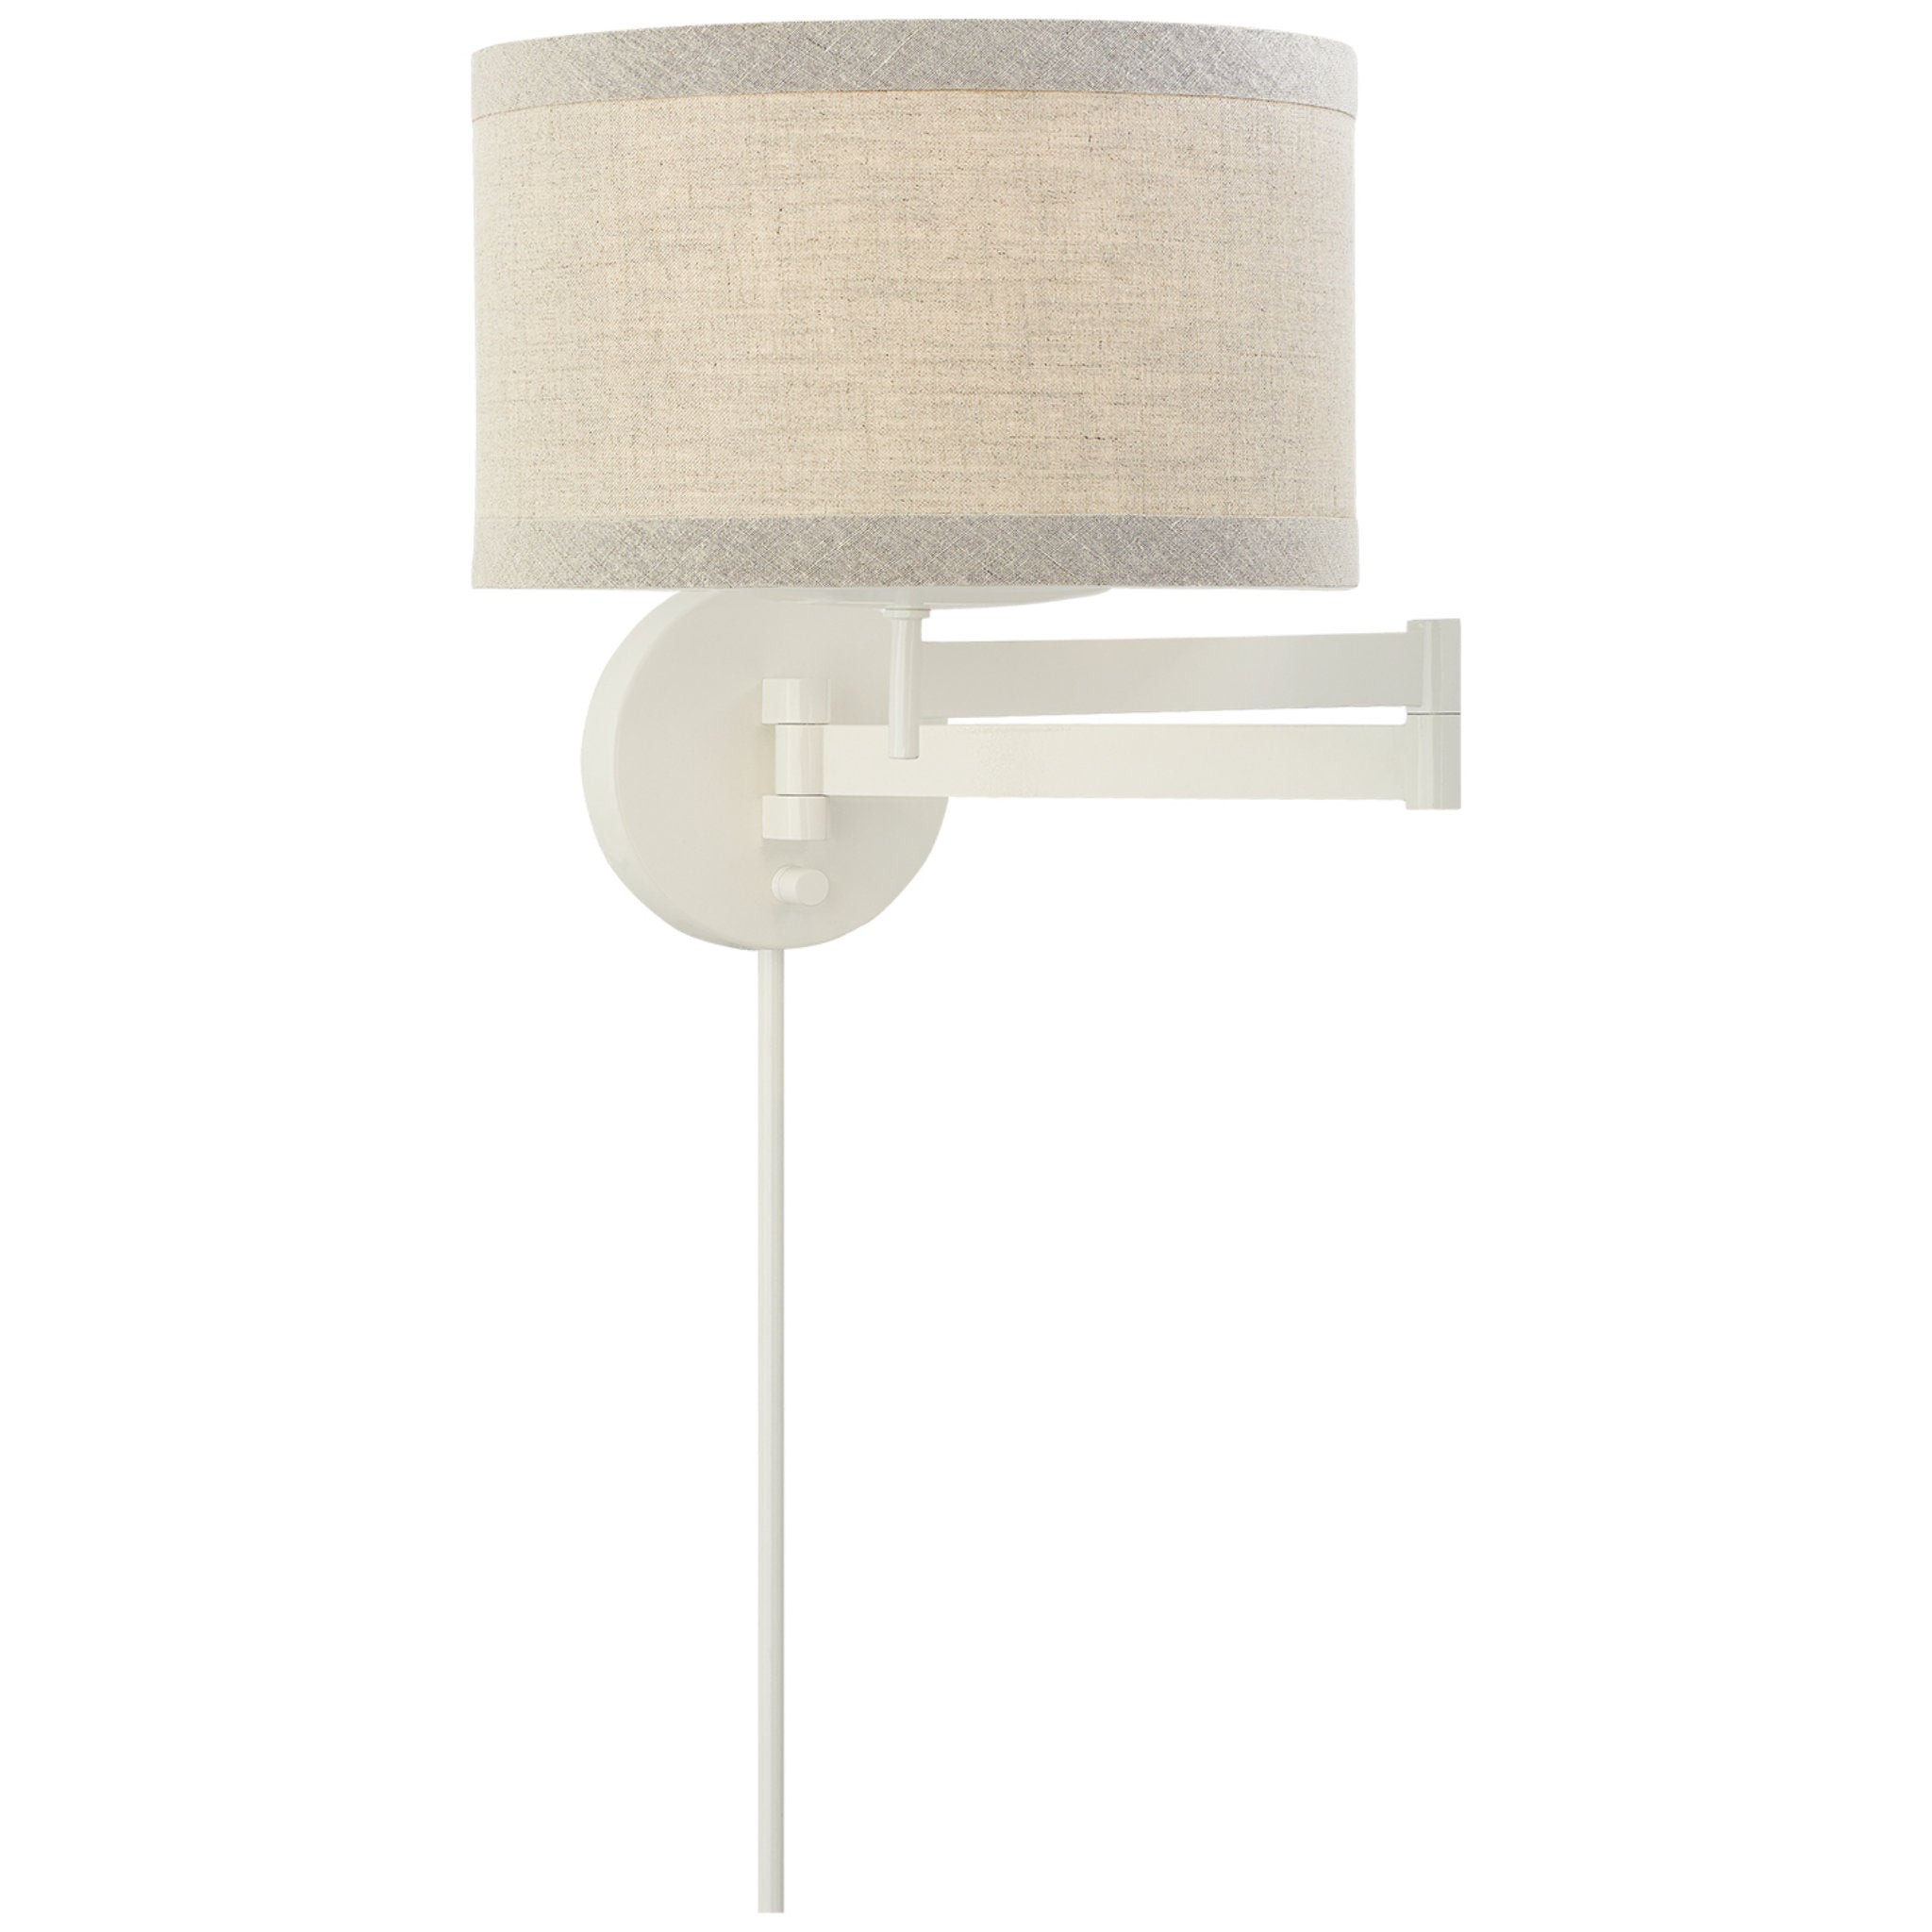 kate spade new york Walker Swing Arm Sconce in Light Cream with Natural Linen Shade